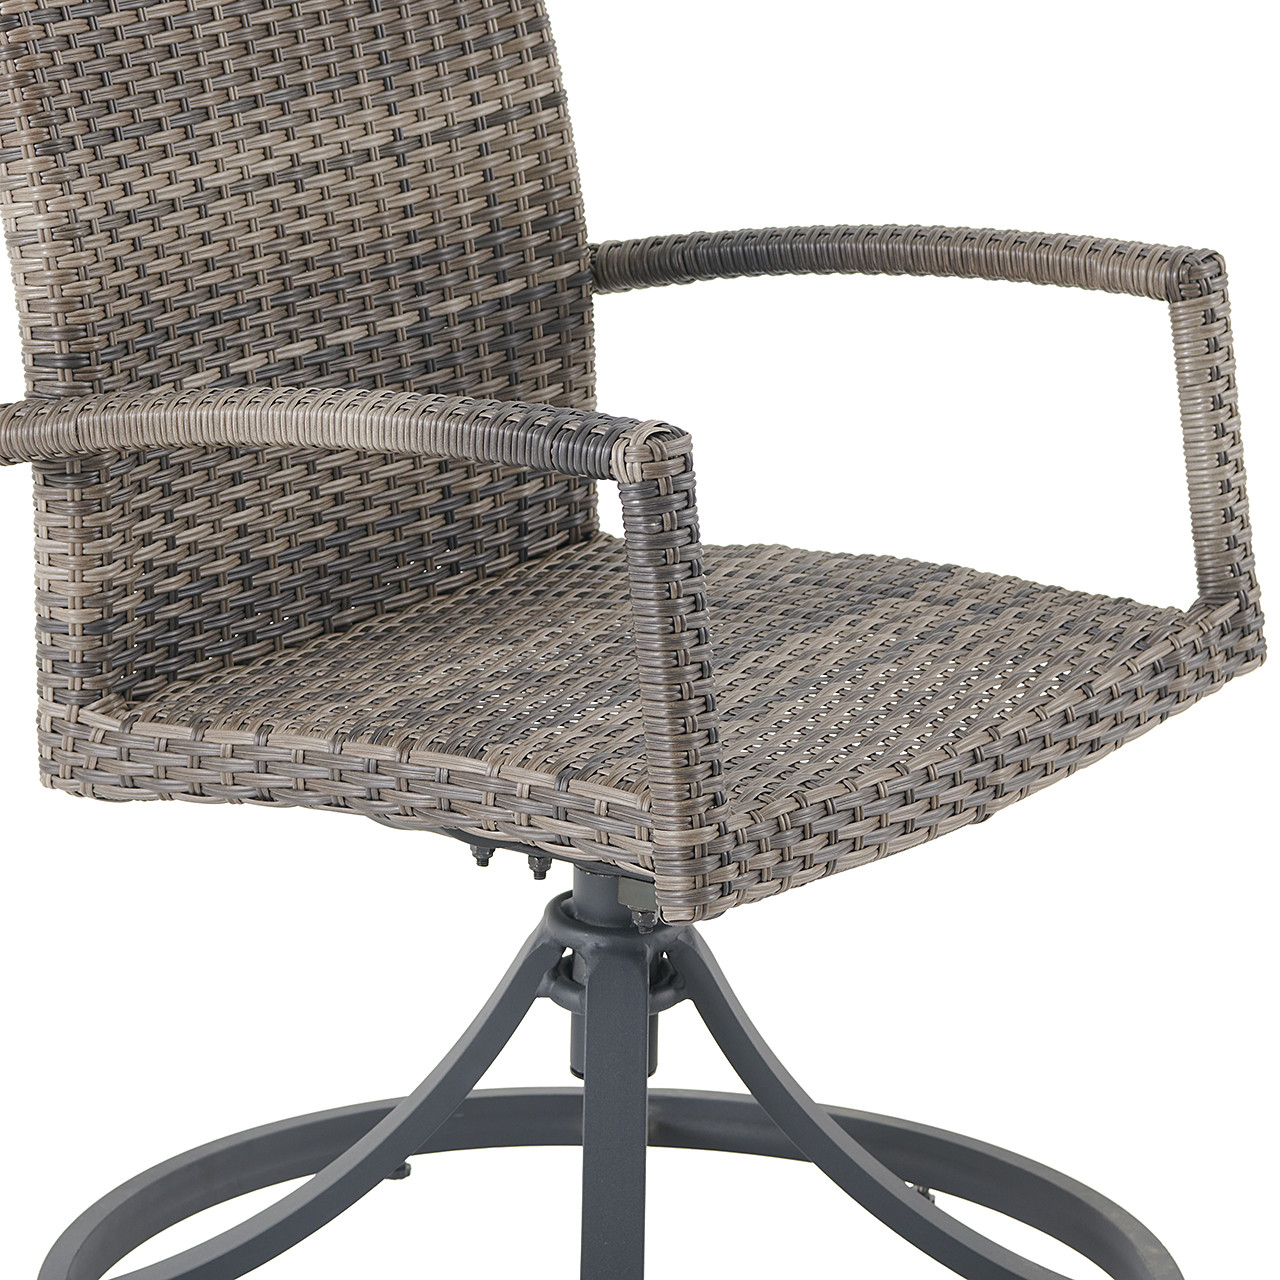 Contempo Husk Outdoor Wicker Swivel Dining Chair